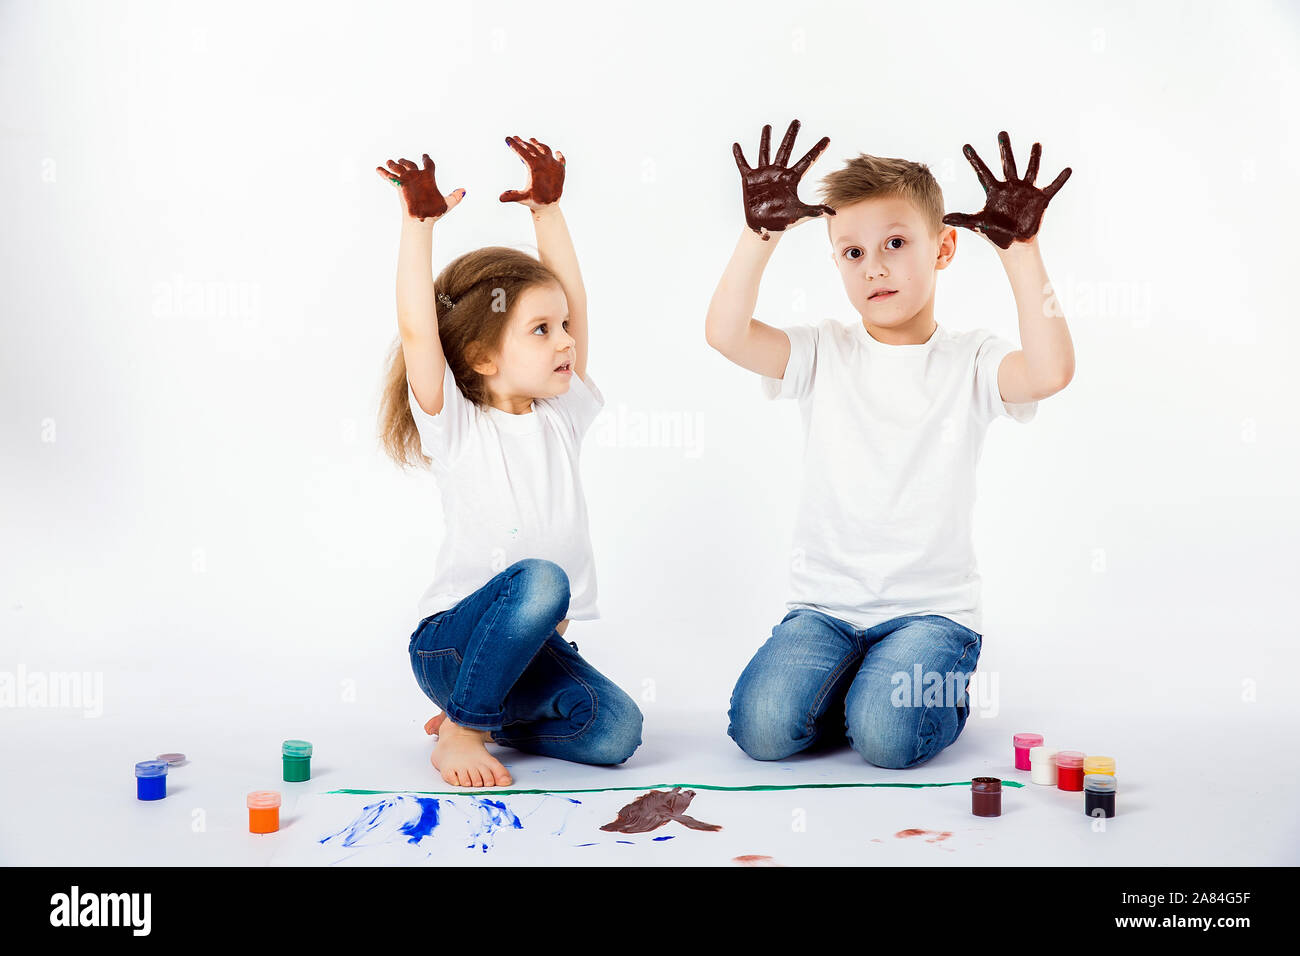 Two pretty child friends boy and girl in white shirts and blue jeans,  trendy hair style, barefoot, drawing pictures on white sheet of paper by  paints isolated on white. Showing hands in